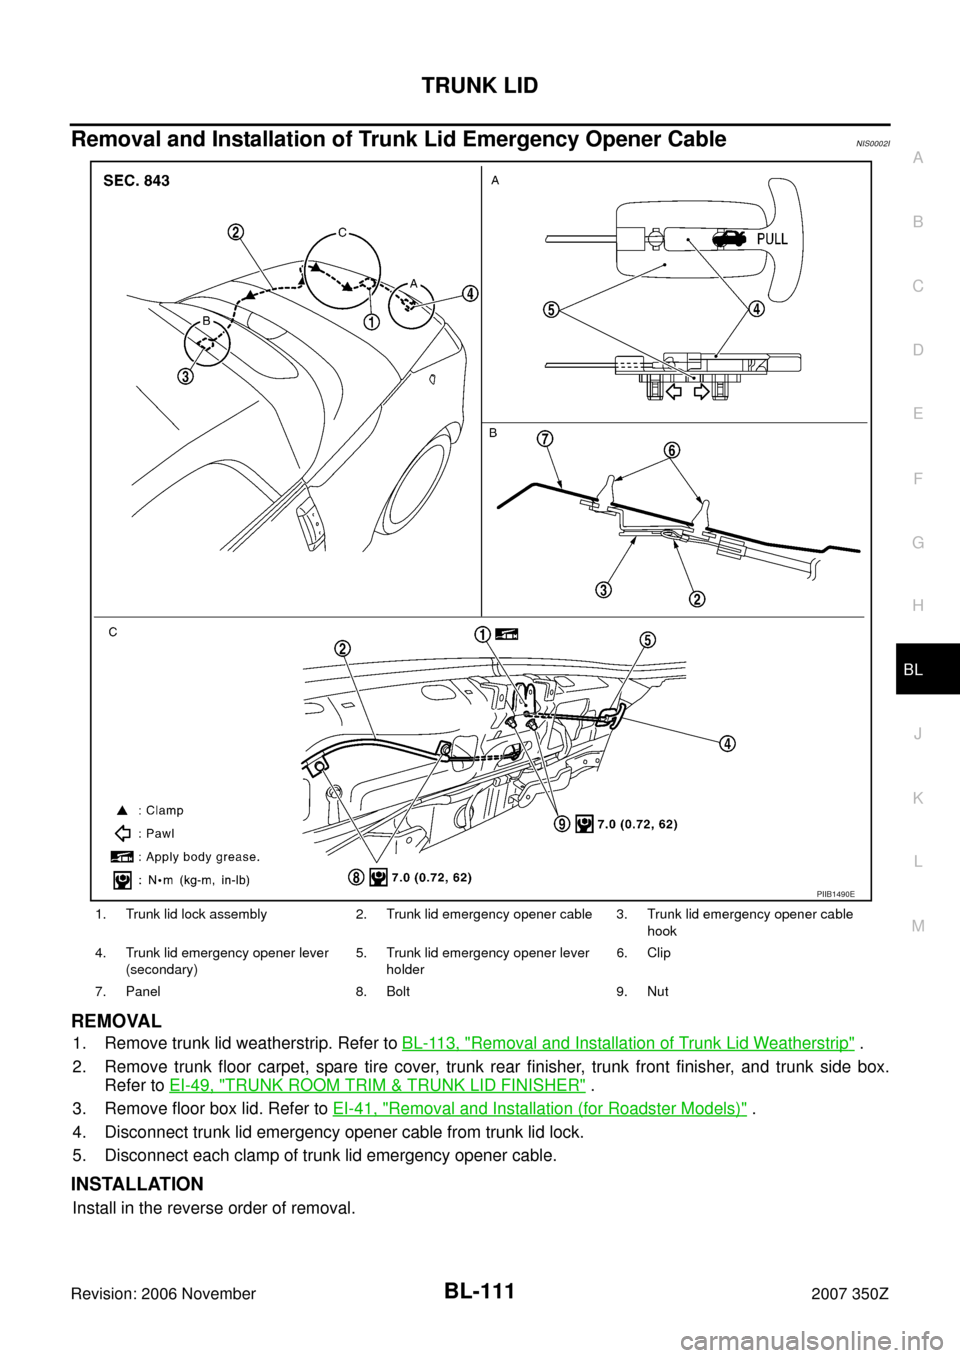 NISSAN 350Z 2007 Z33 Body, Lock And Security System Workshop Manual TRUNK LID
BL-111
C
D
E
F
G
H
J
K
L
MA
B
BL
Revision: 2006 November2007 350Z
Removal and Installation of Trunk Lid Emergency Opener CableNIS0002I
REMOVAL
1. Remove trunk lid weatherstrip. Refer to BL-1